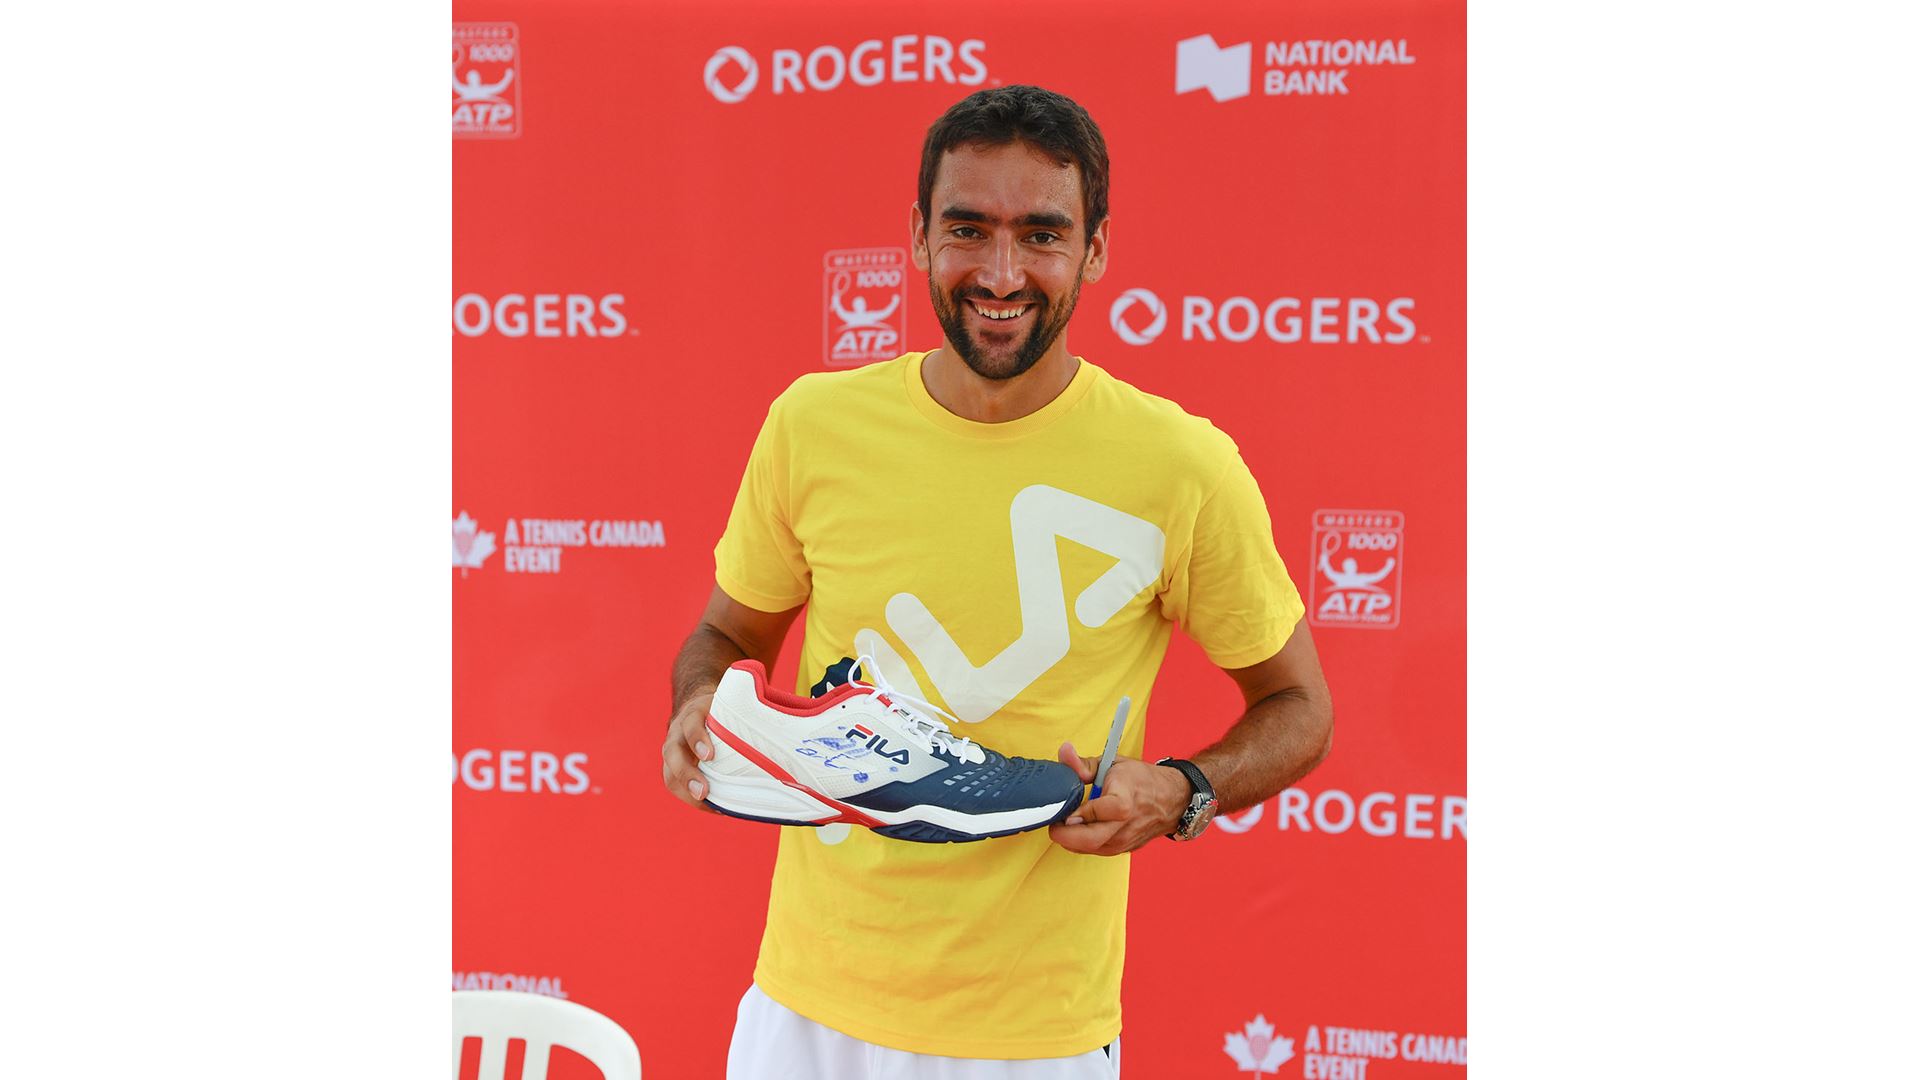 FILA Hosts Junior Tennis Clinic and Q A with Marin Cilic in Toronto at Rogers Cup